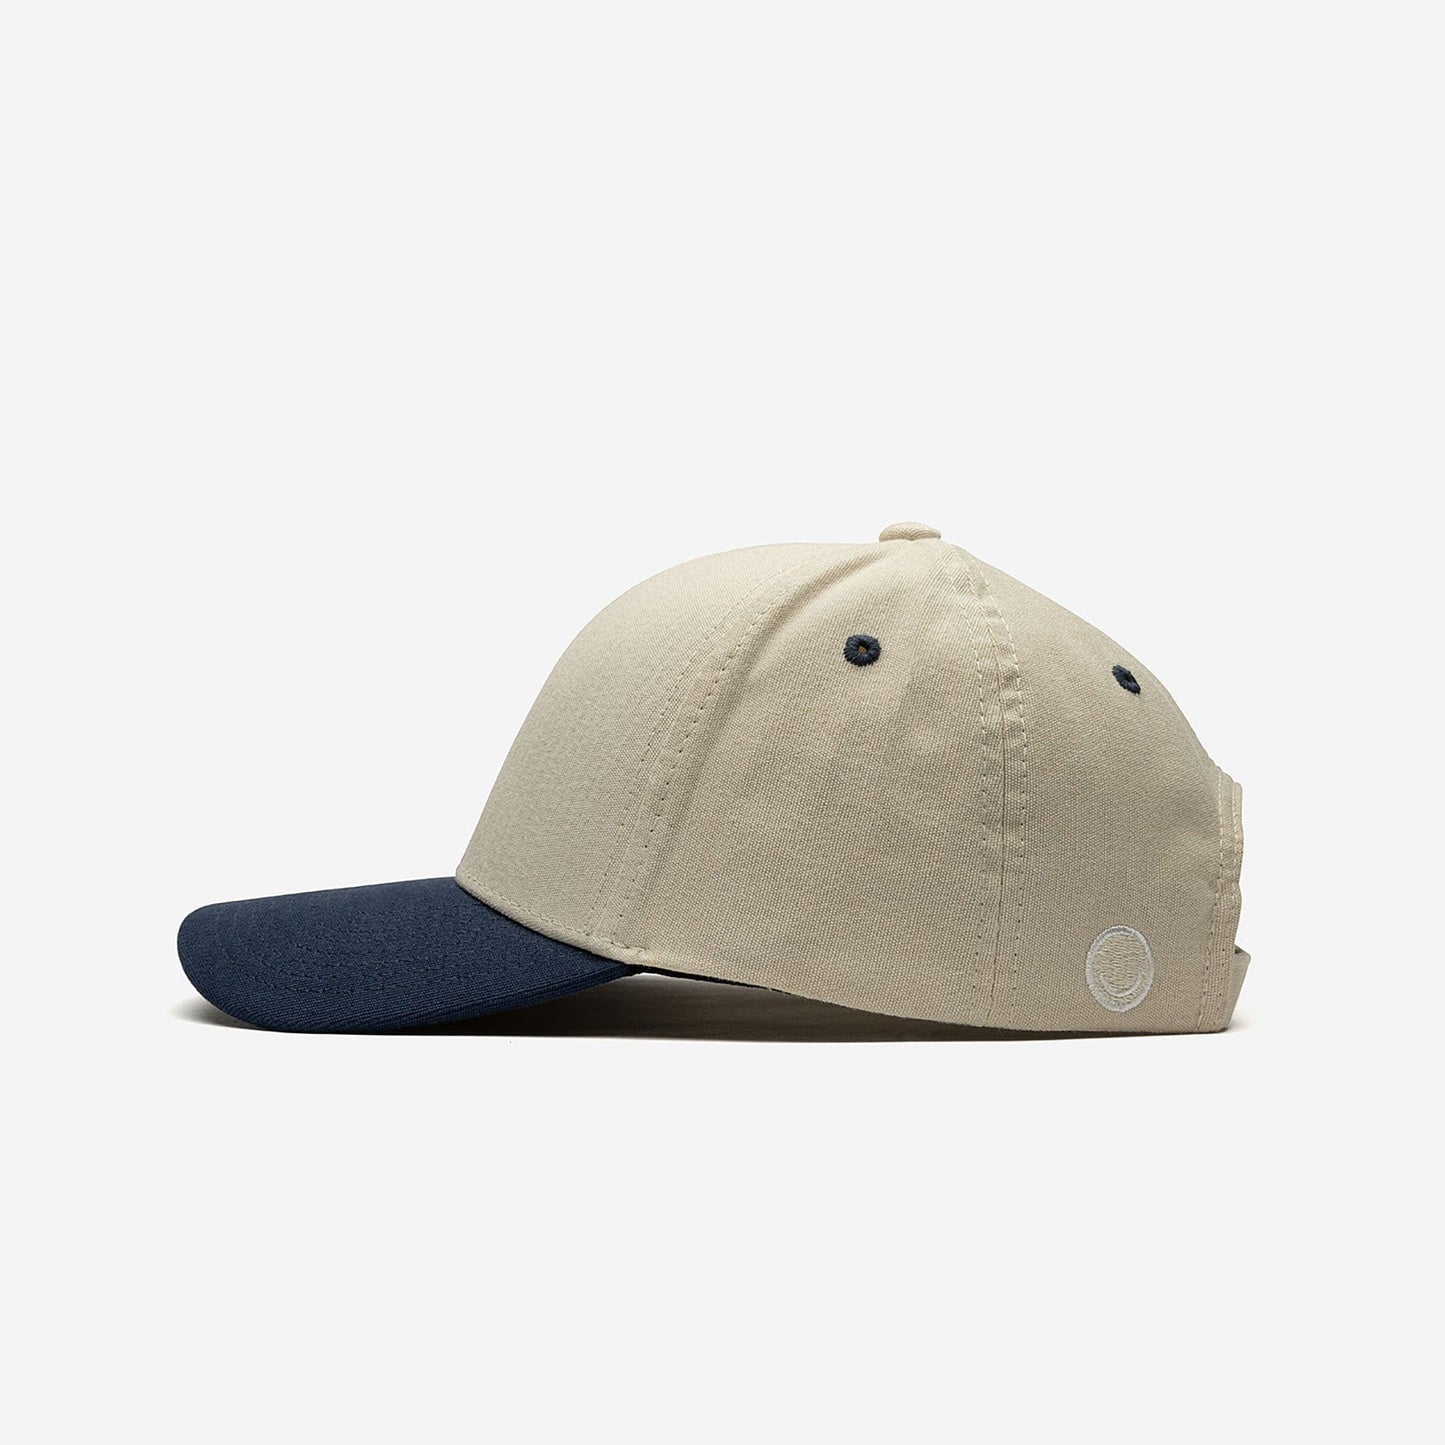 Casual Style Baseball Cap, Oyster-Navy